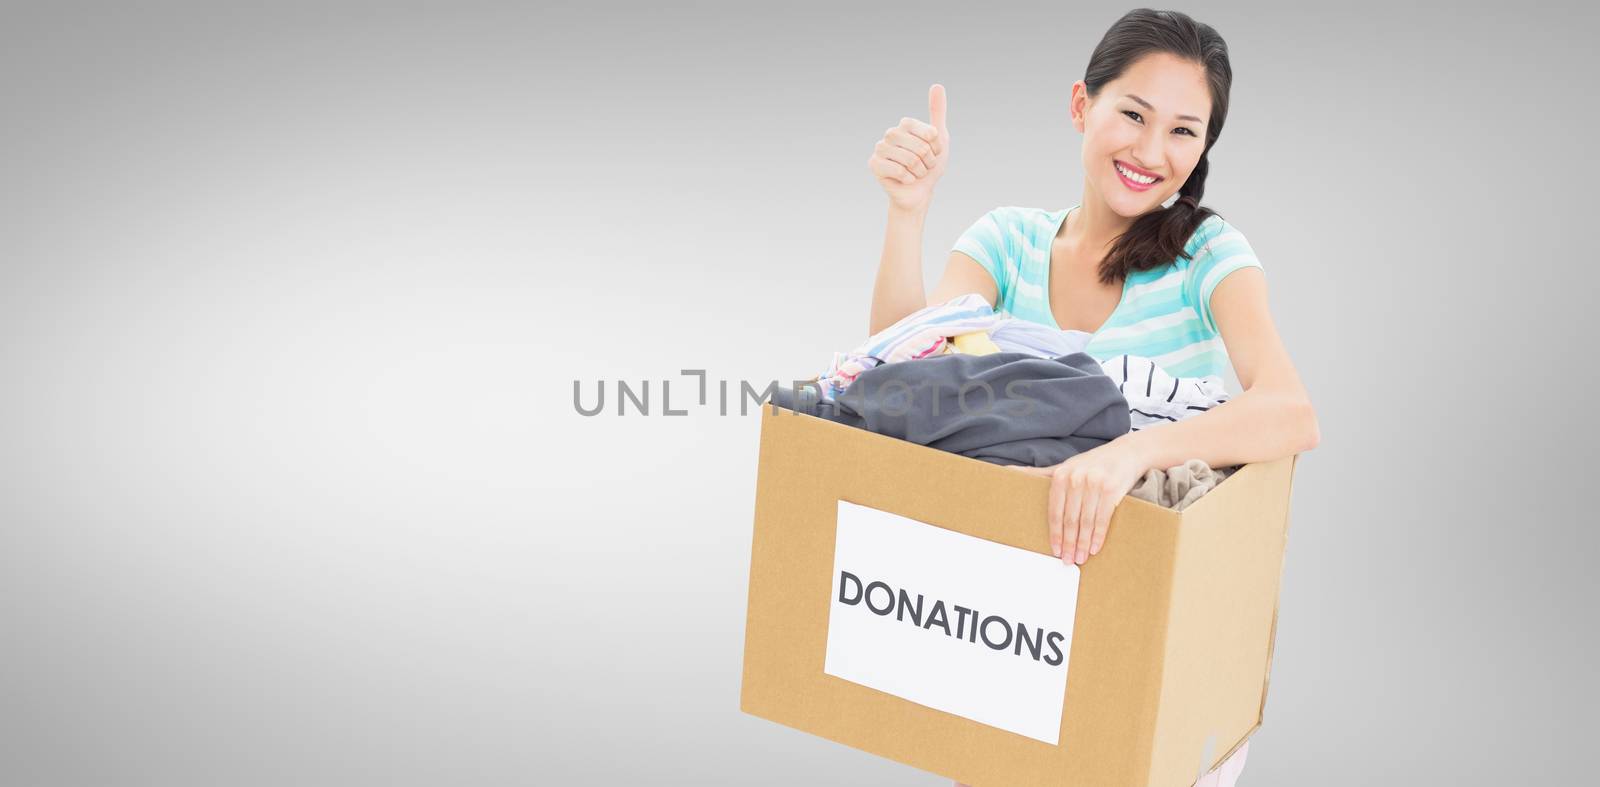 Woman with clothes donation gesturing thumbs up against grey vignette